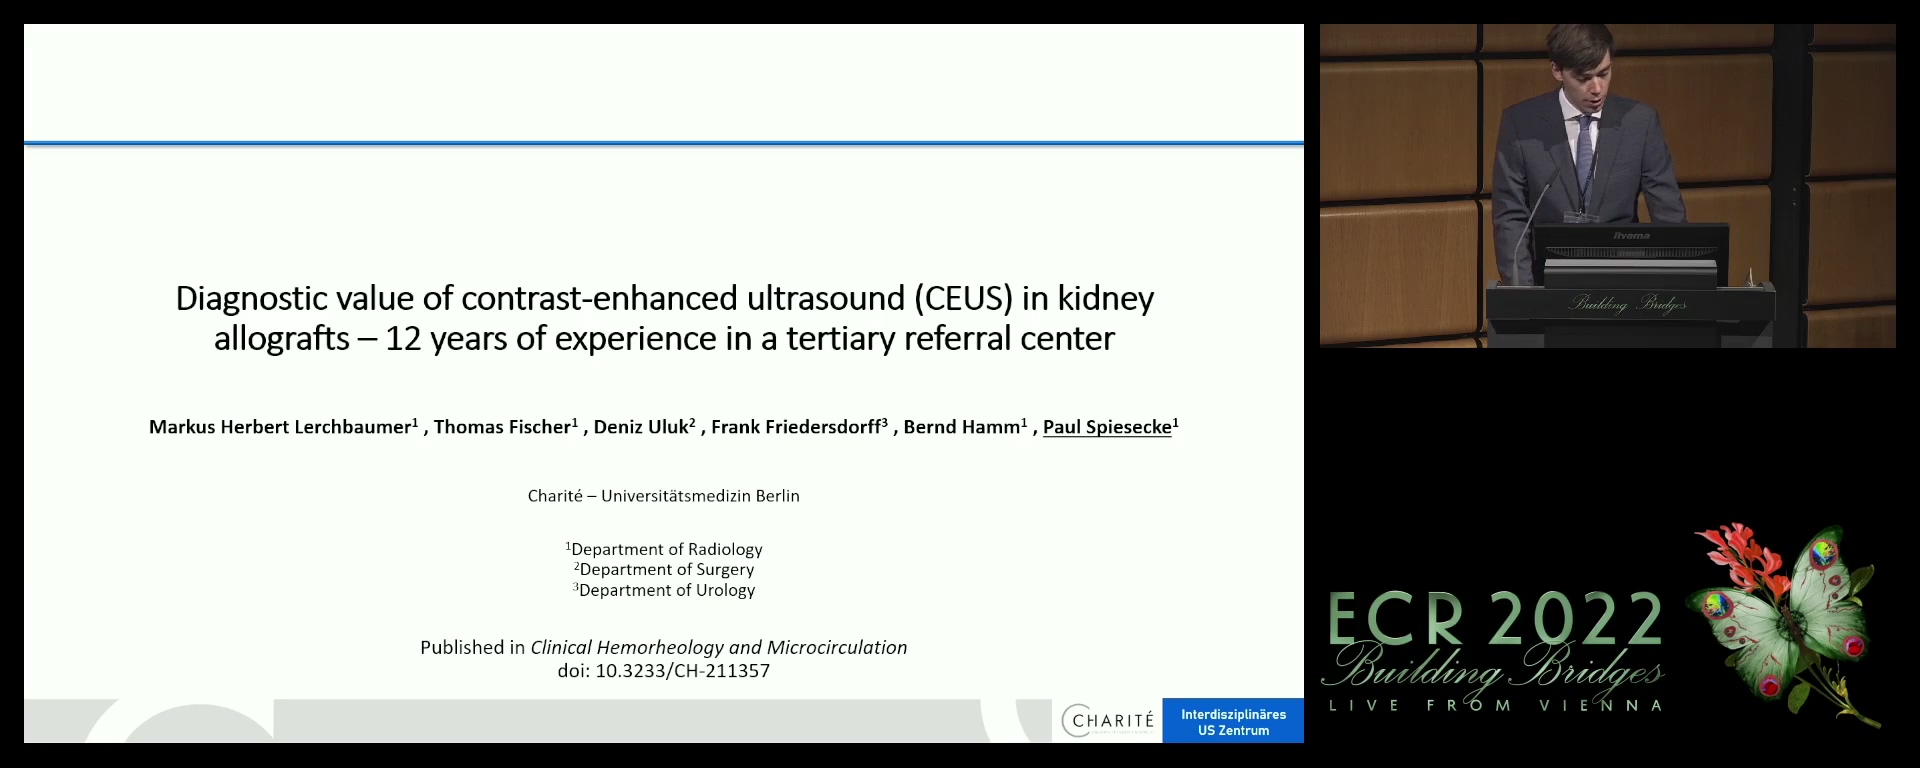 Diagnostic value of contrast-enhanced ultrasound in renal grafts: a 12 year tertial referral centre experience